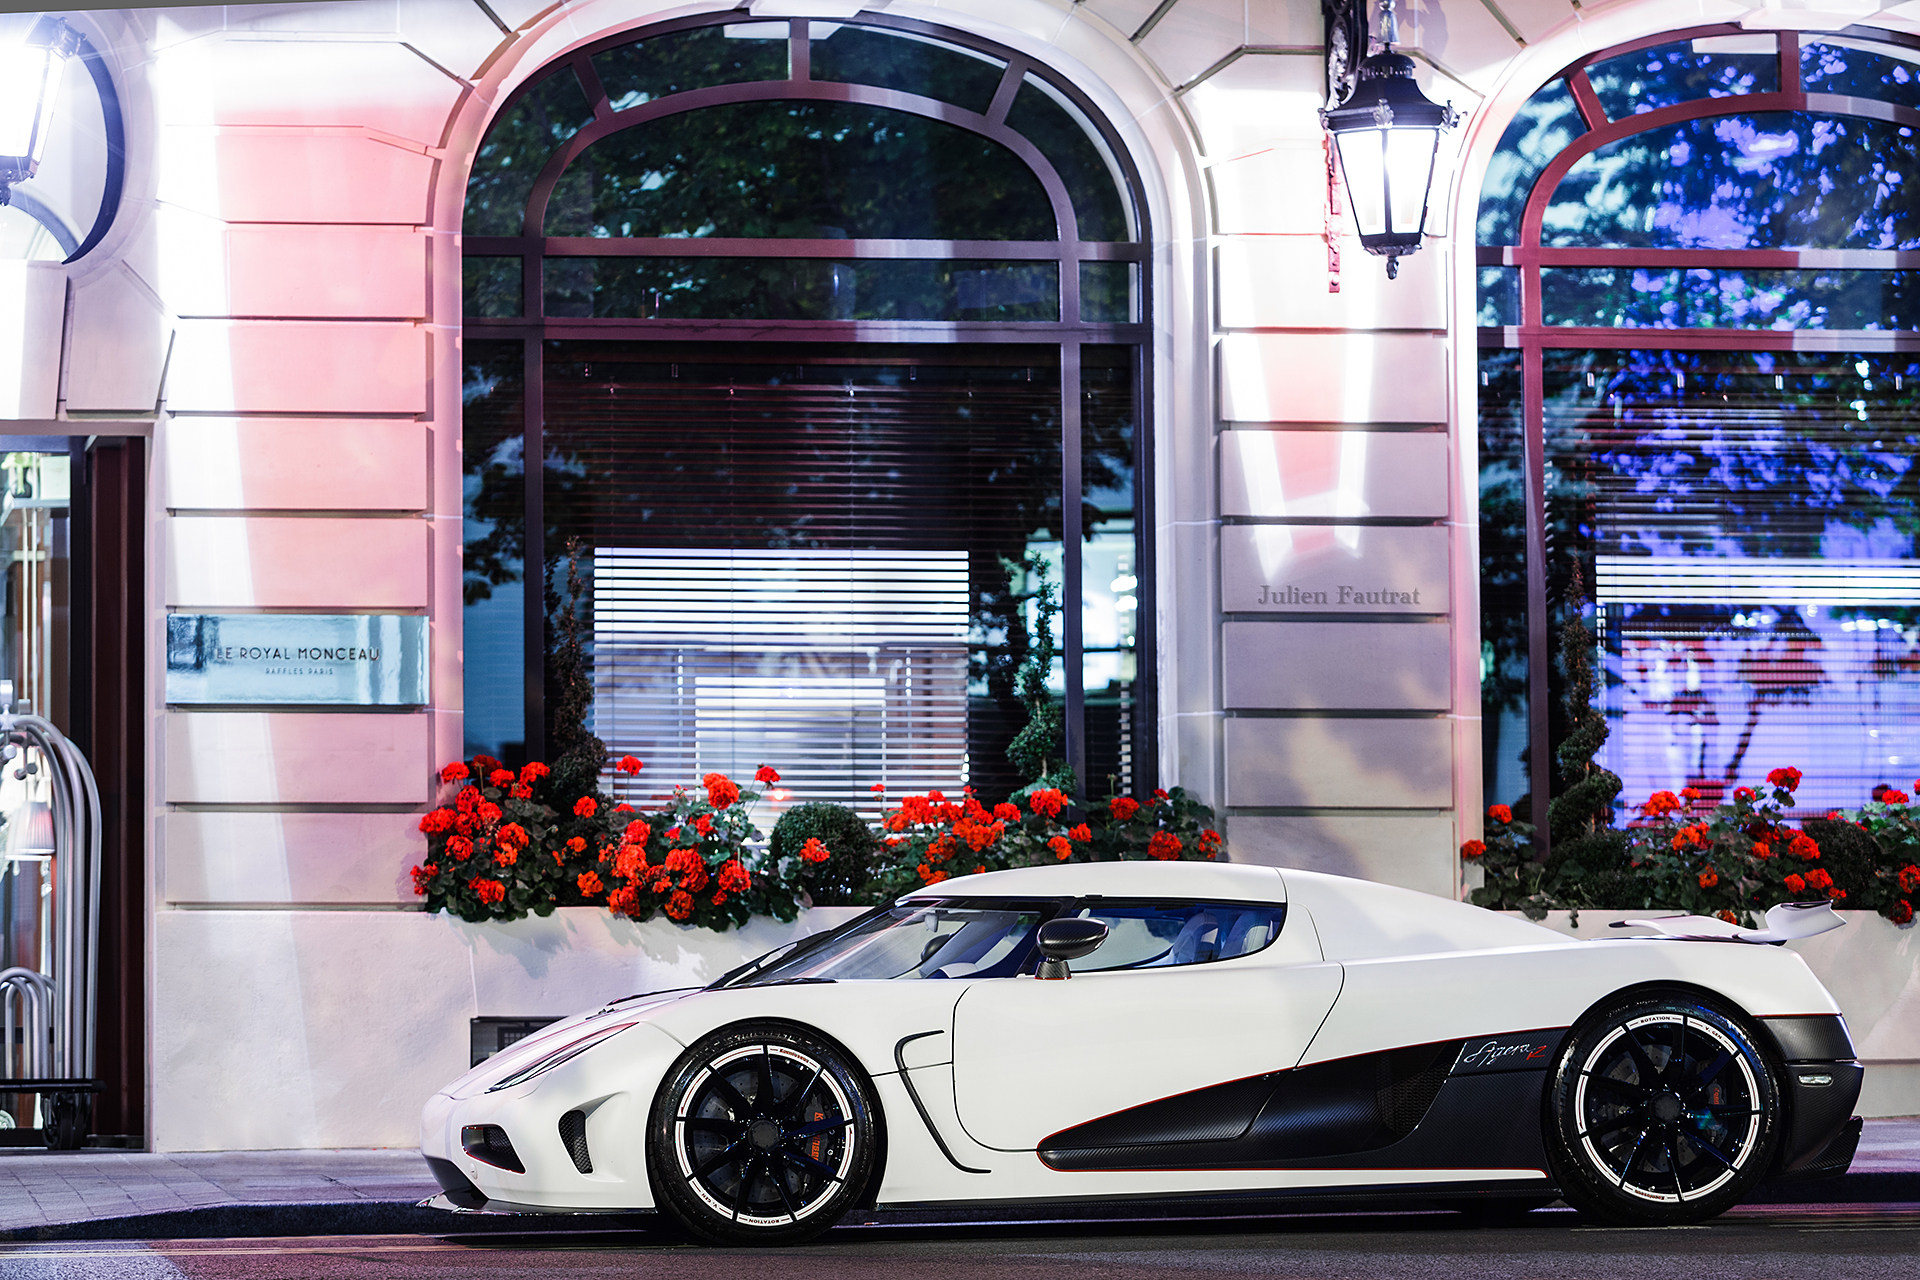 129859 download wallpaper auto, sports, koenigsegg, cars, sports car, agera, koenigsegg agera screensavers and pictures for free